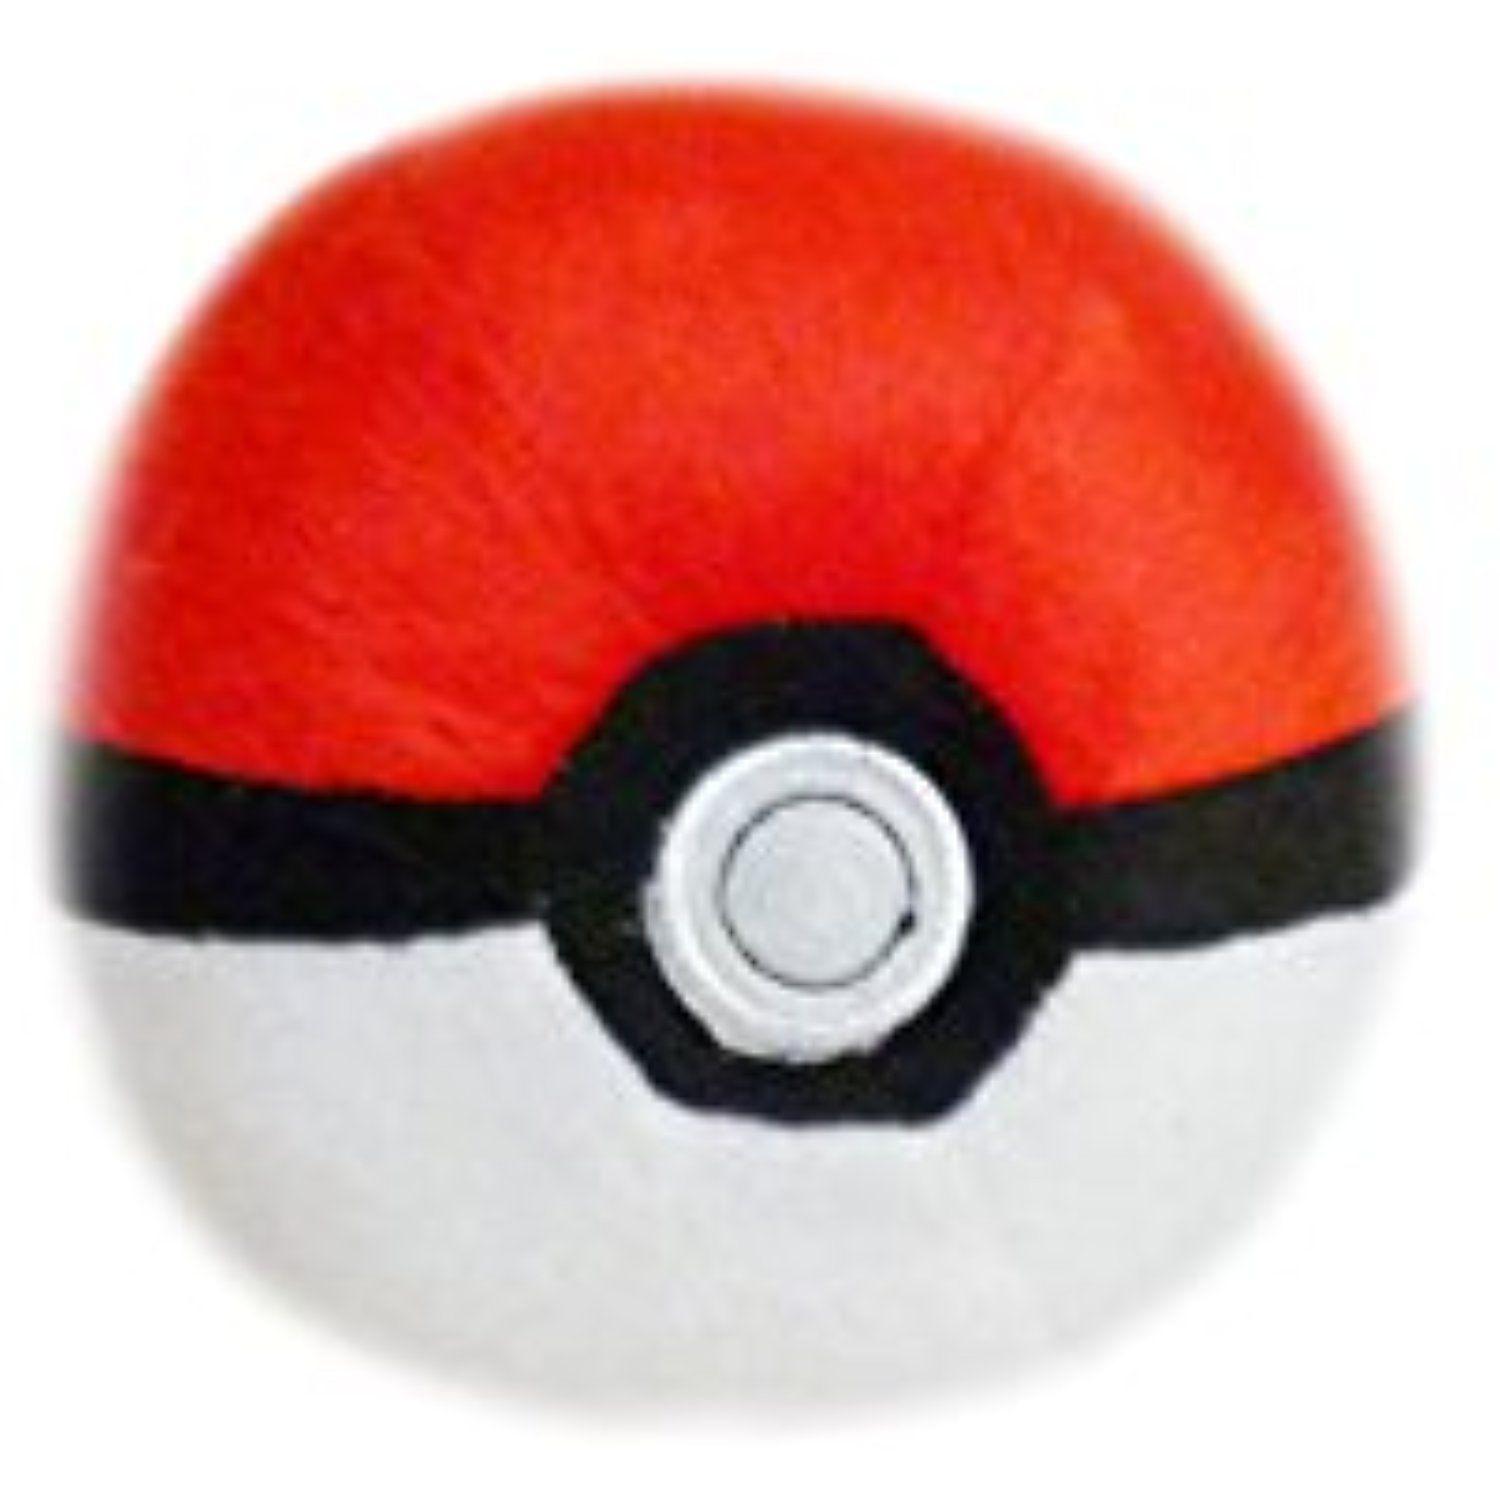 Pokemon Red and White Ball Logo - Pokemon: 5 Inch Red White Poke Ball Plush Toy * Be Sure To Check Out